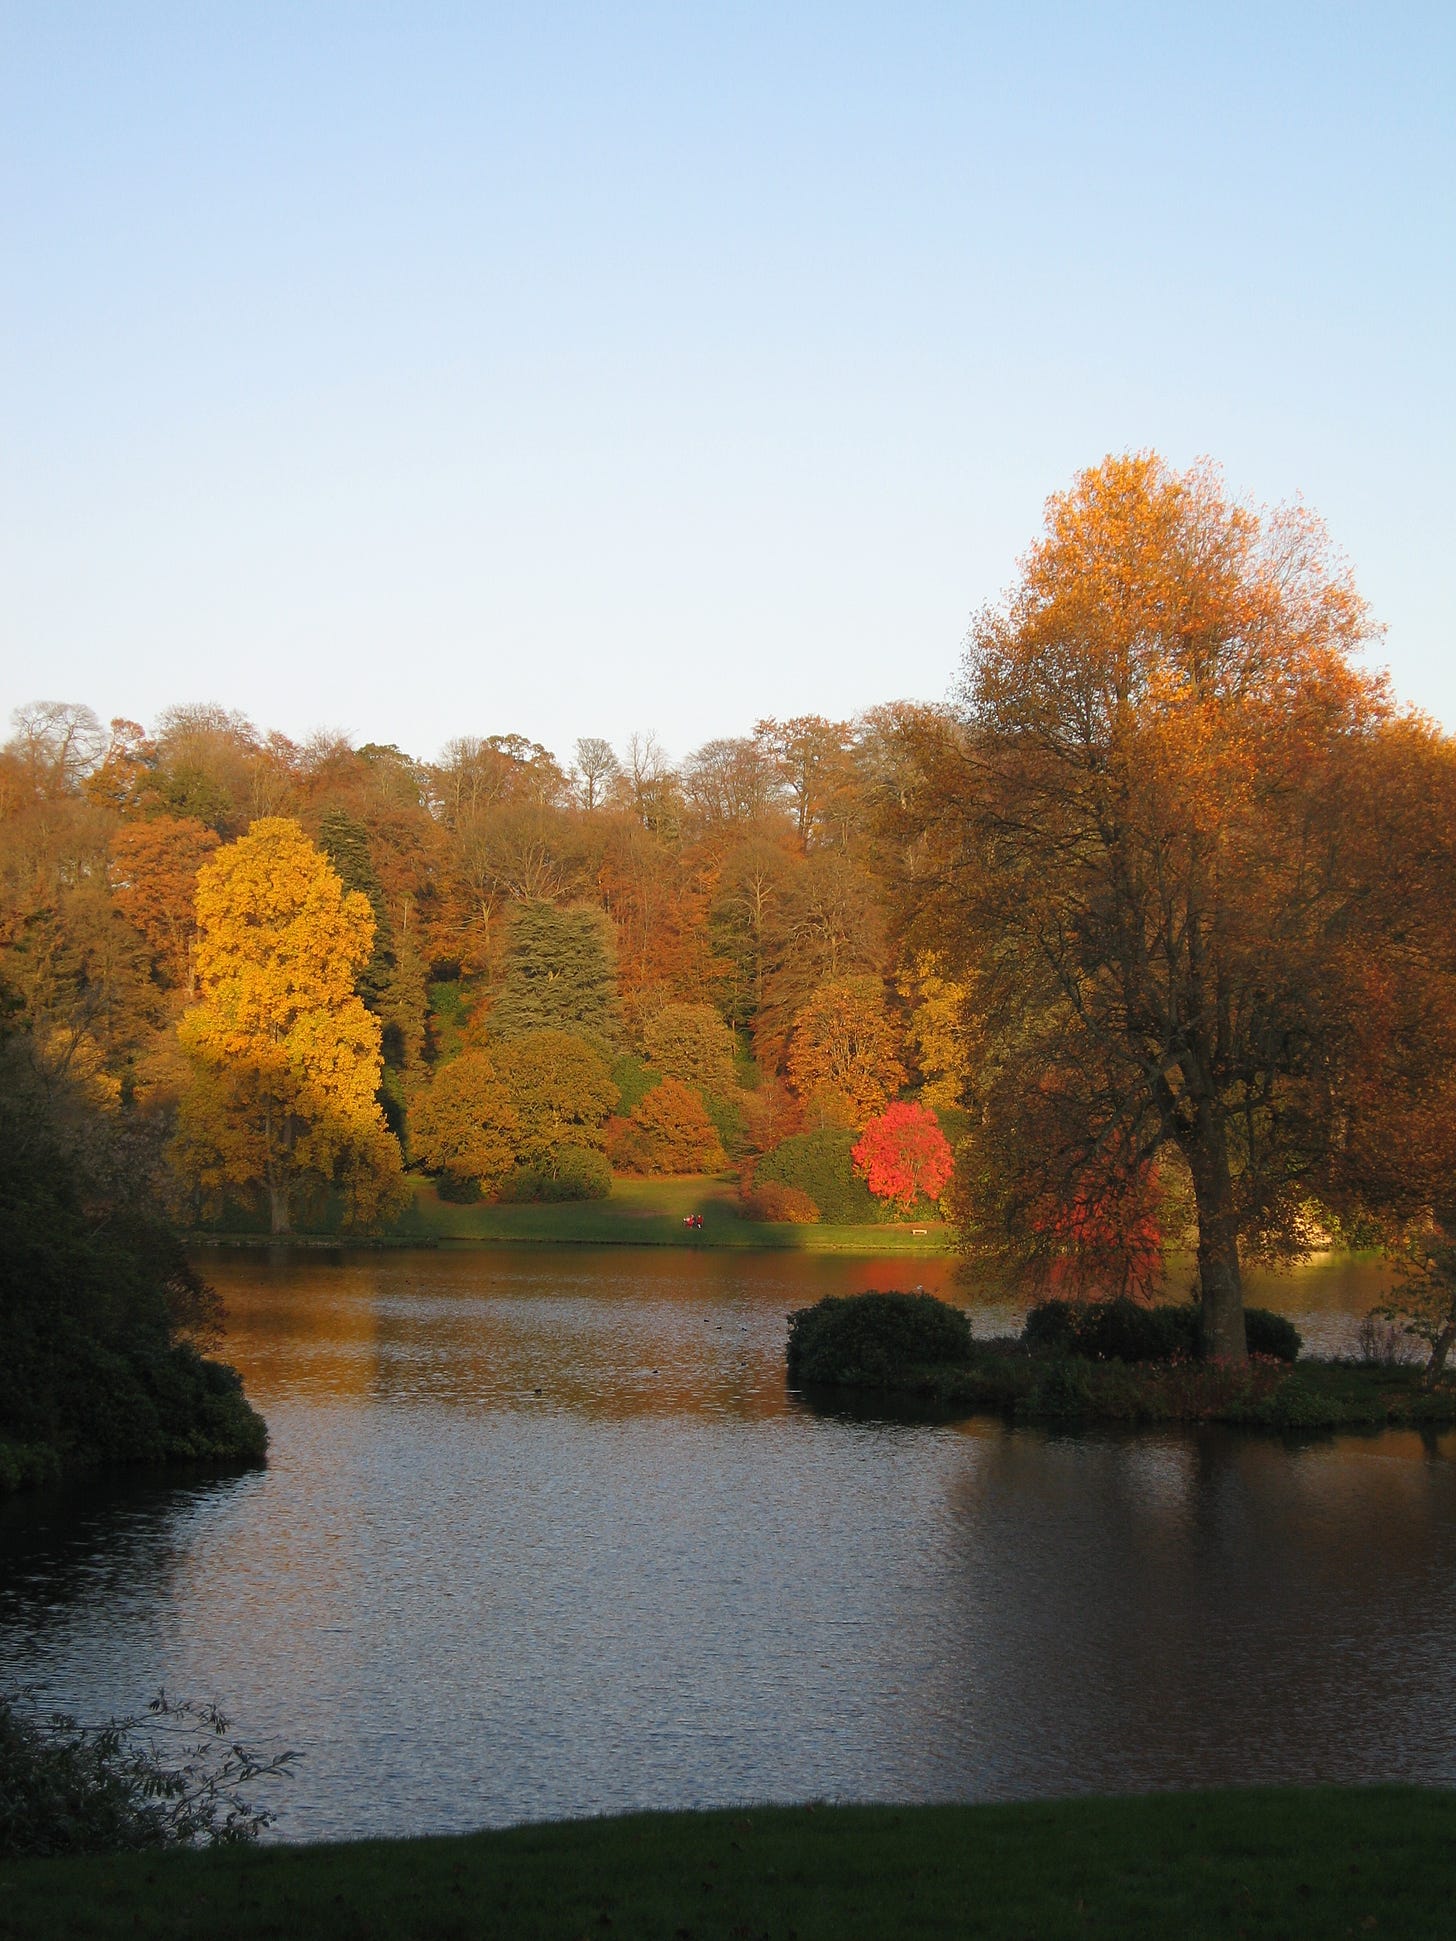 Autumn colours Stourhead Garden, Wiltshire. The trees are in lovely autumn colours